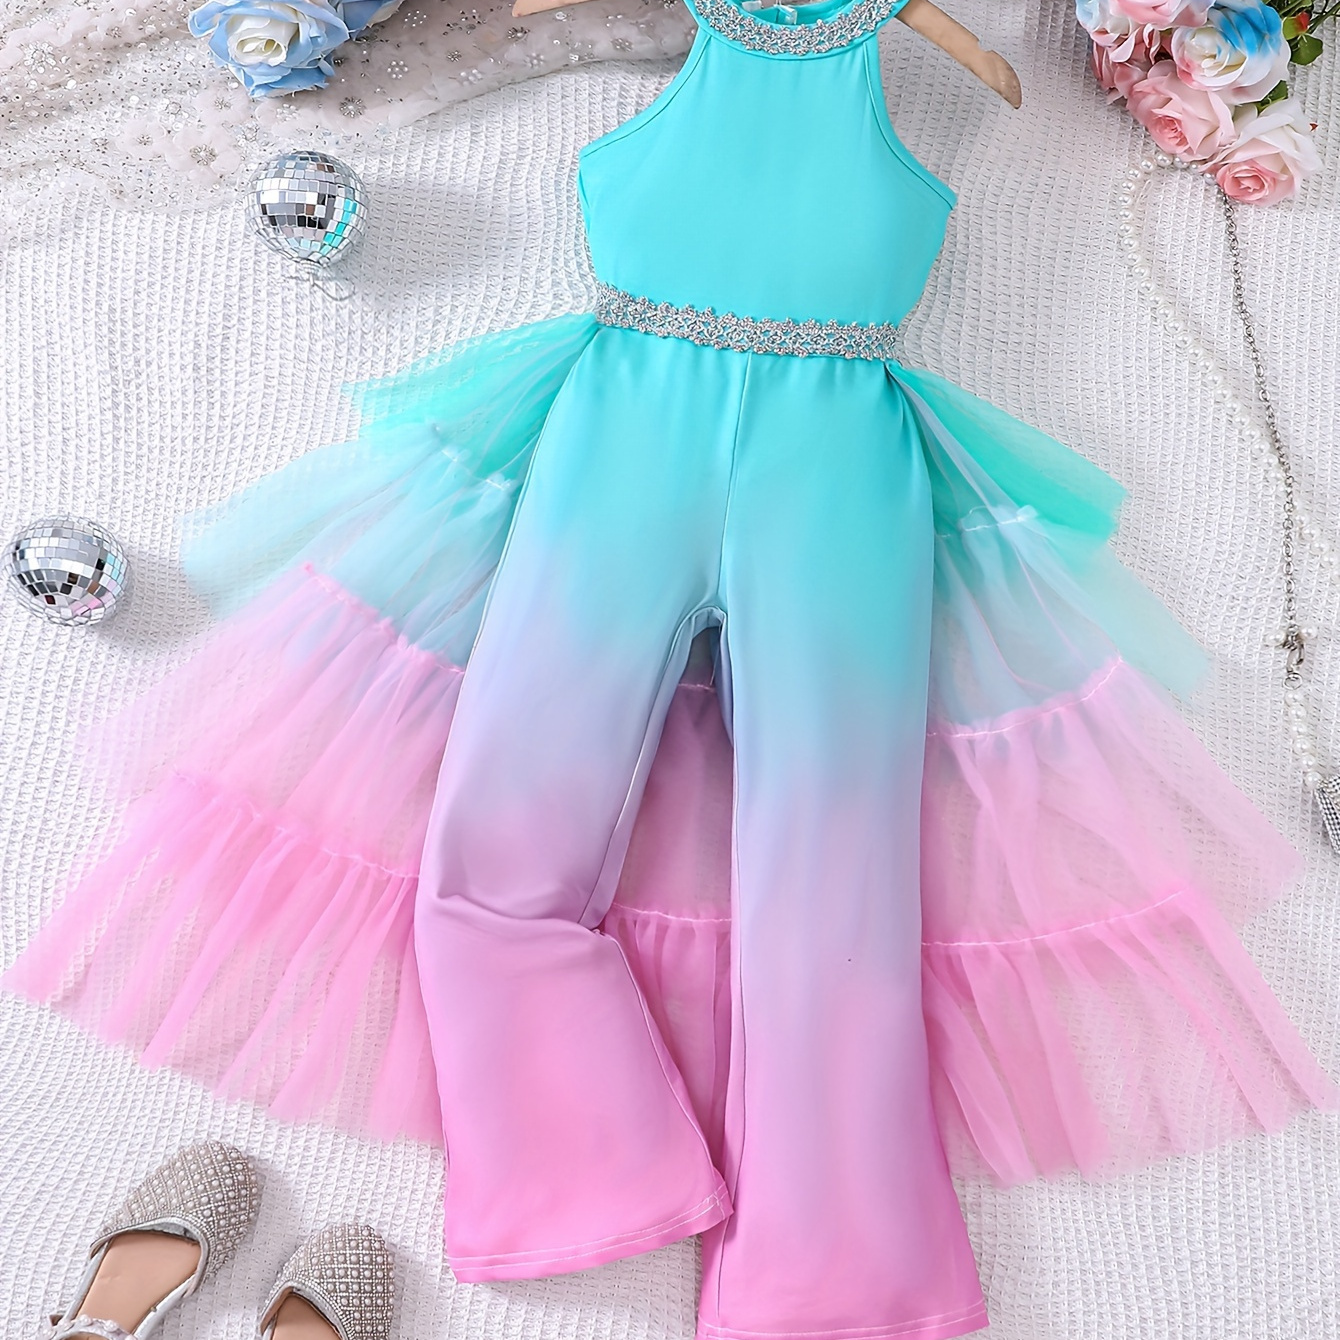 

Girl's Stylish Gradient Mesh Decor Jumpsuit, Elegant Romper For Party Performance Gift Summer Outdoor